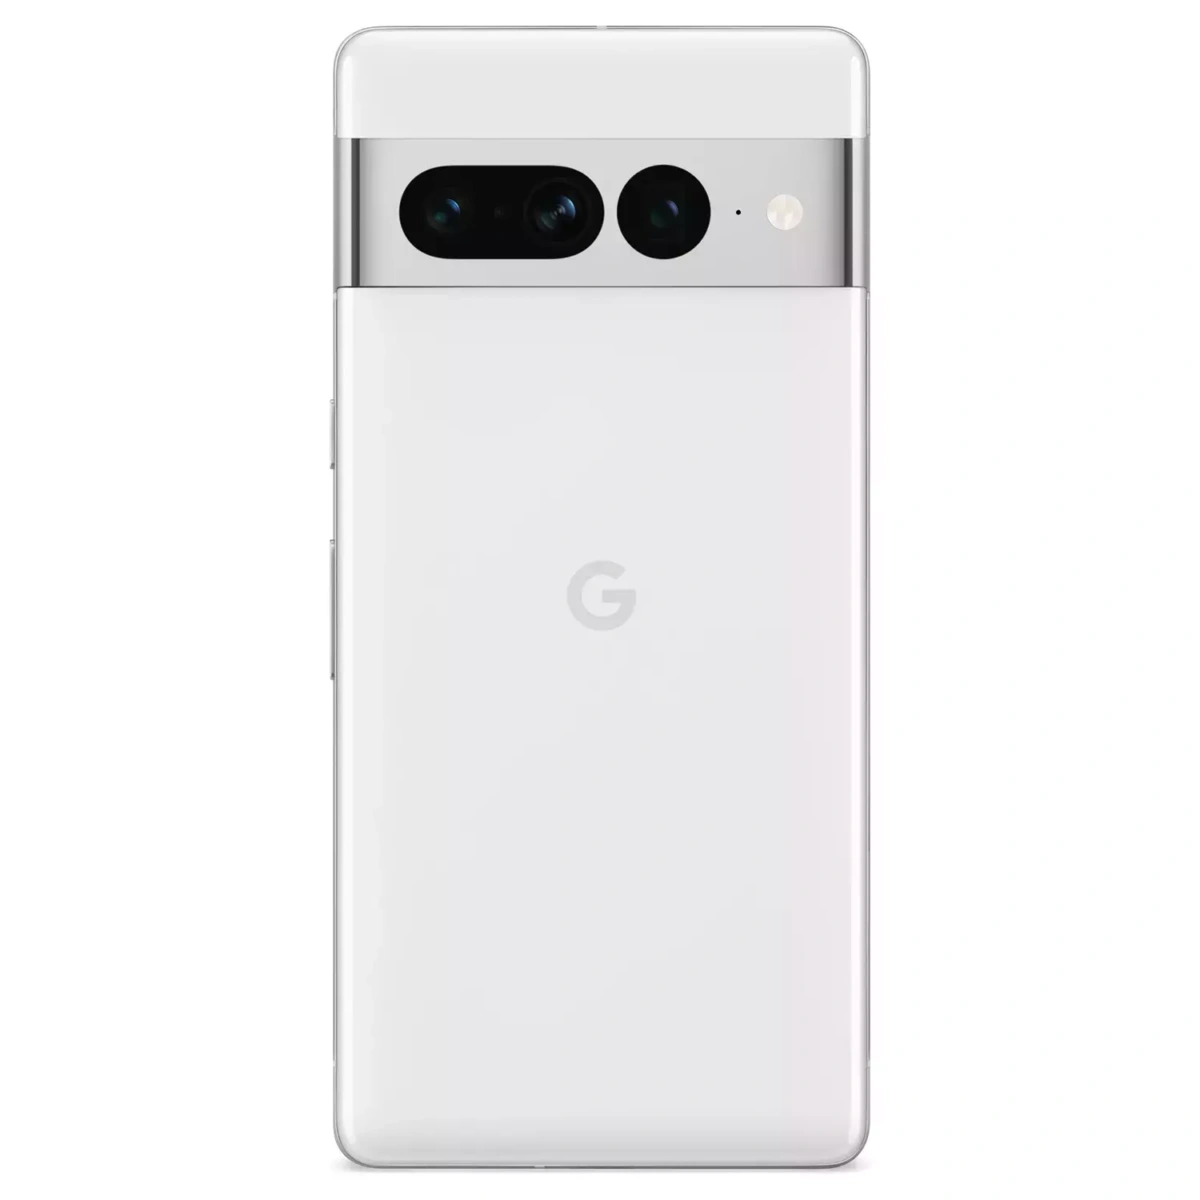 Does Google Pixel 7 Pro Have Wireless Charging?